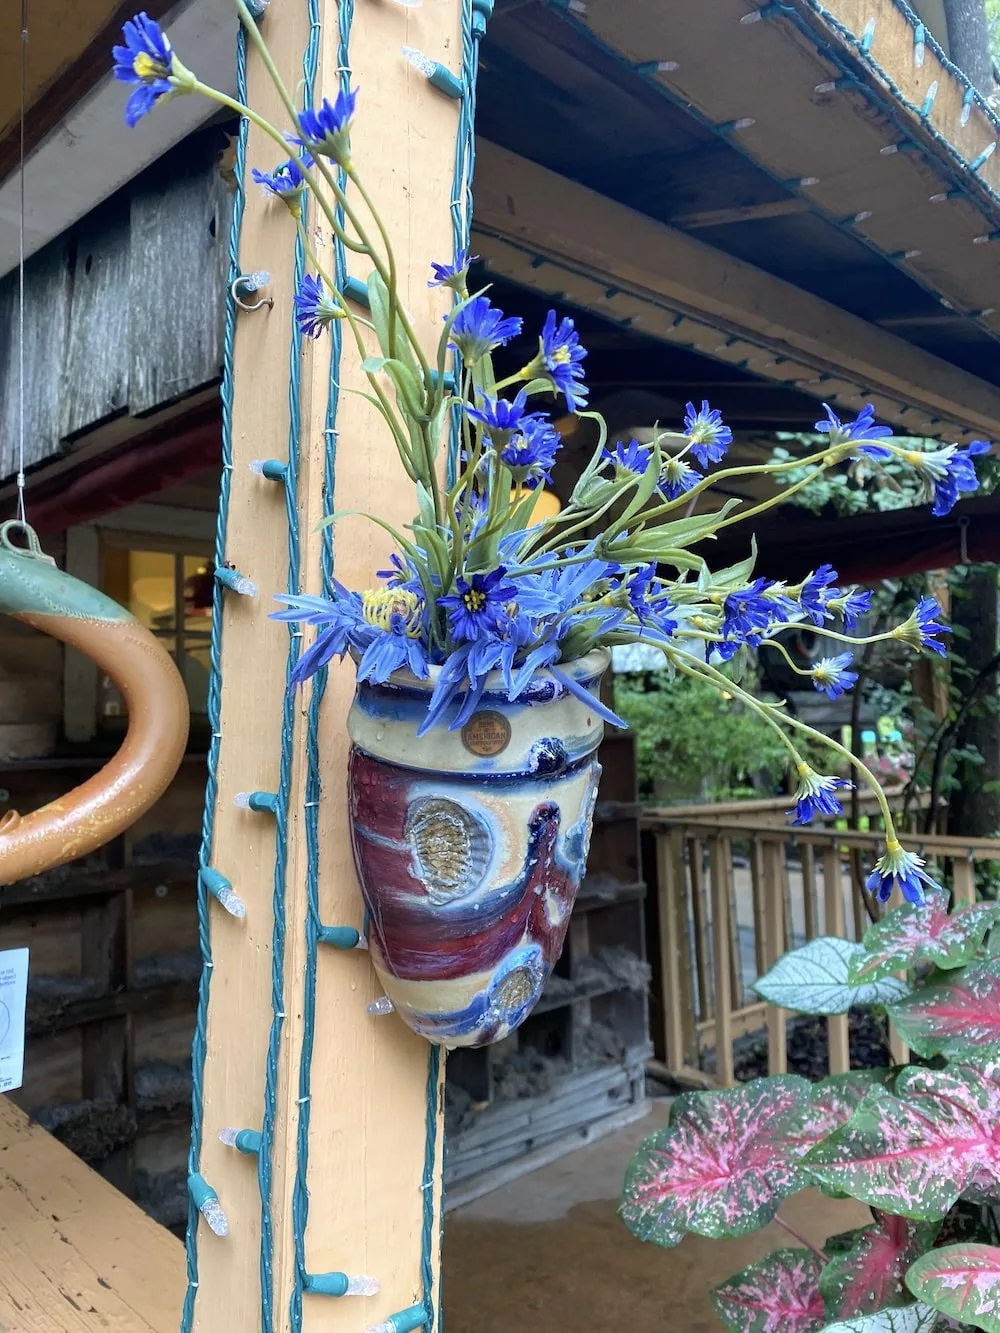 Handmade pottery filled with flowers at Silver Dollar City in Branson, Missouri